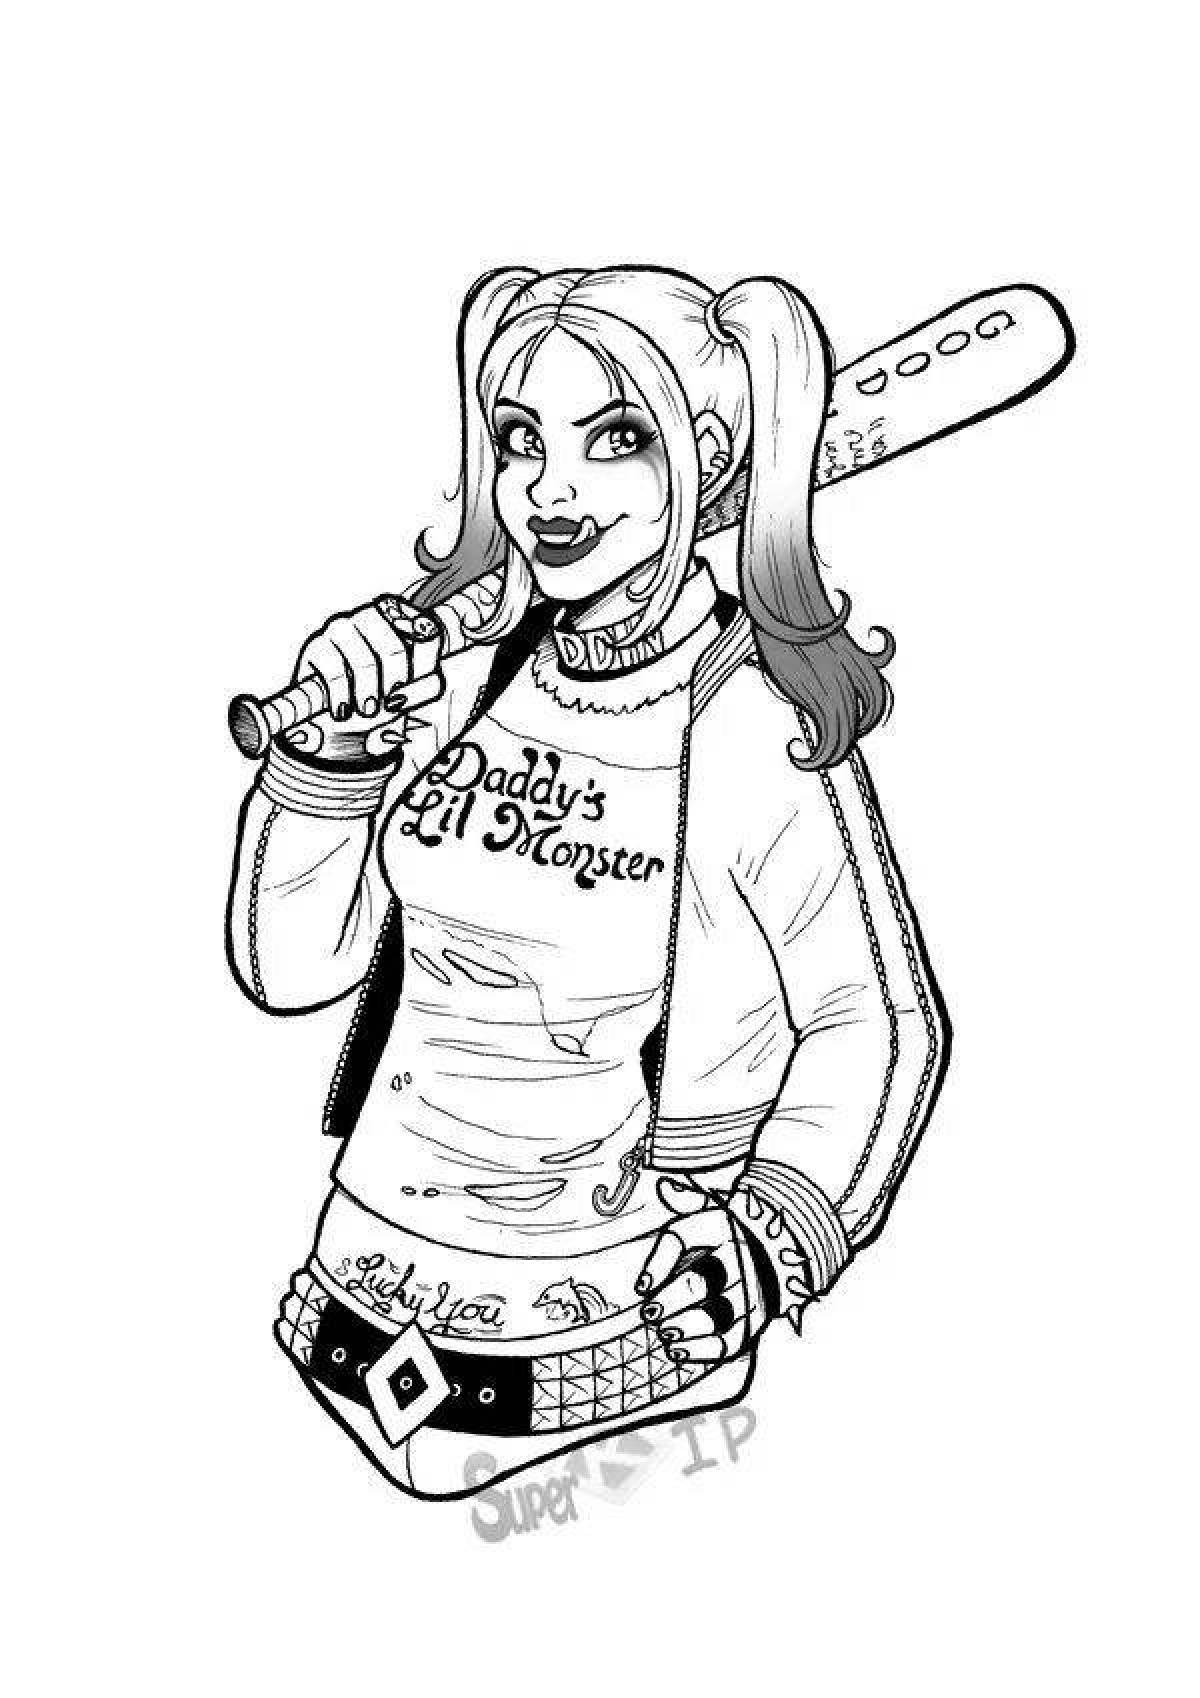 Adorable harley quinn coloring book for kids